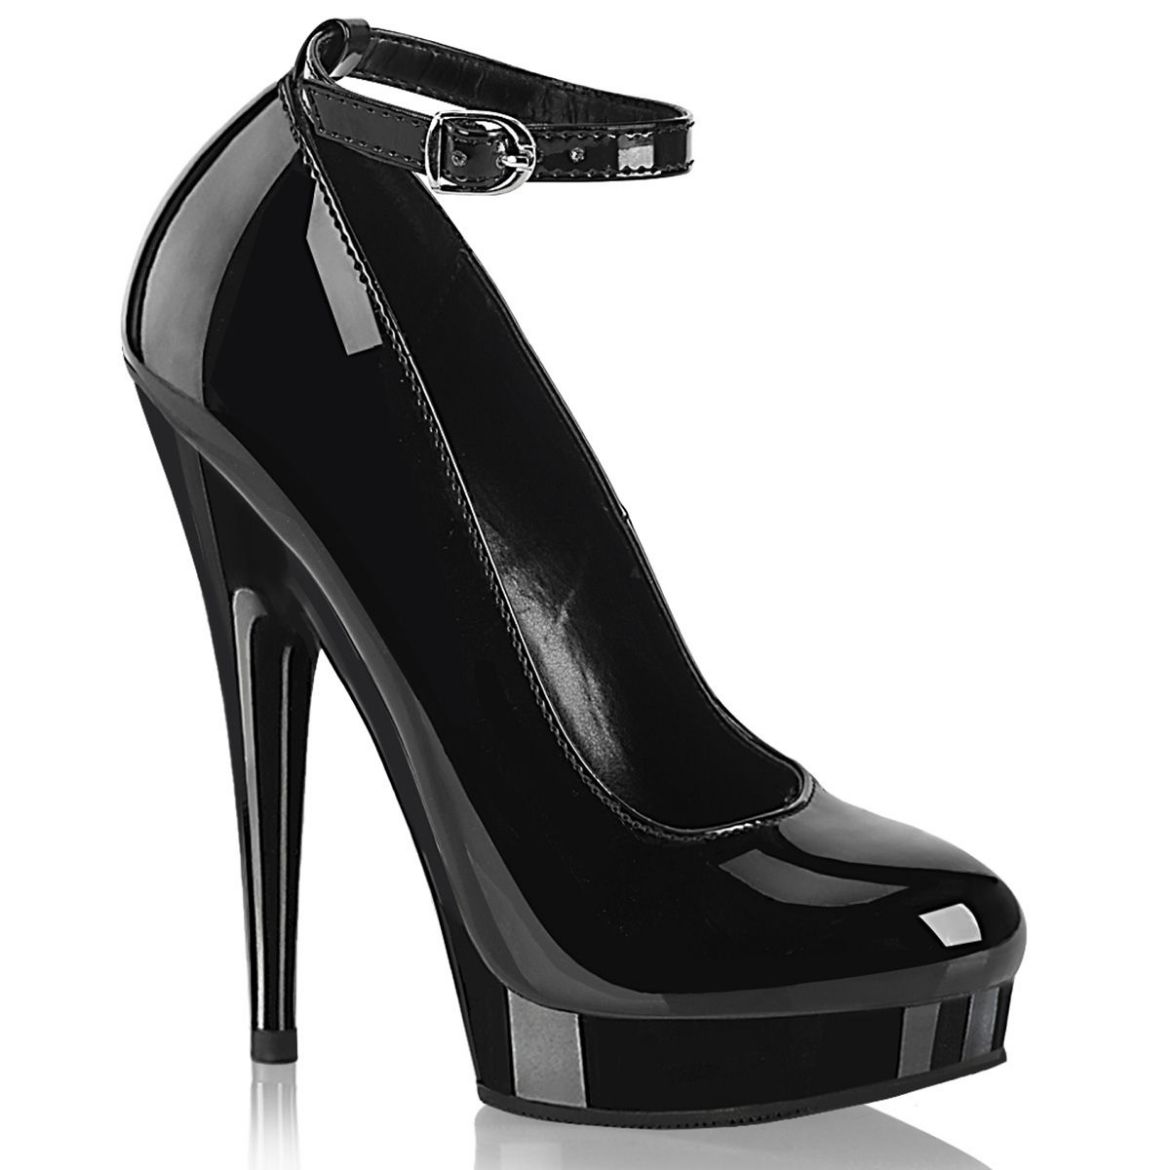 Image of Fabulicious SULTRY-686 Blk Pat/Blk 6 Inch Heel 1 Inch PF Ankle Strap Pump